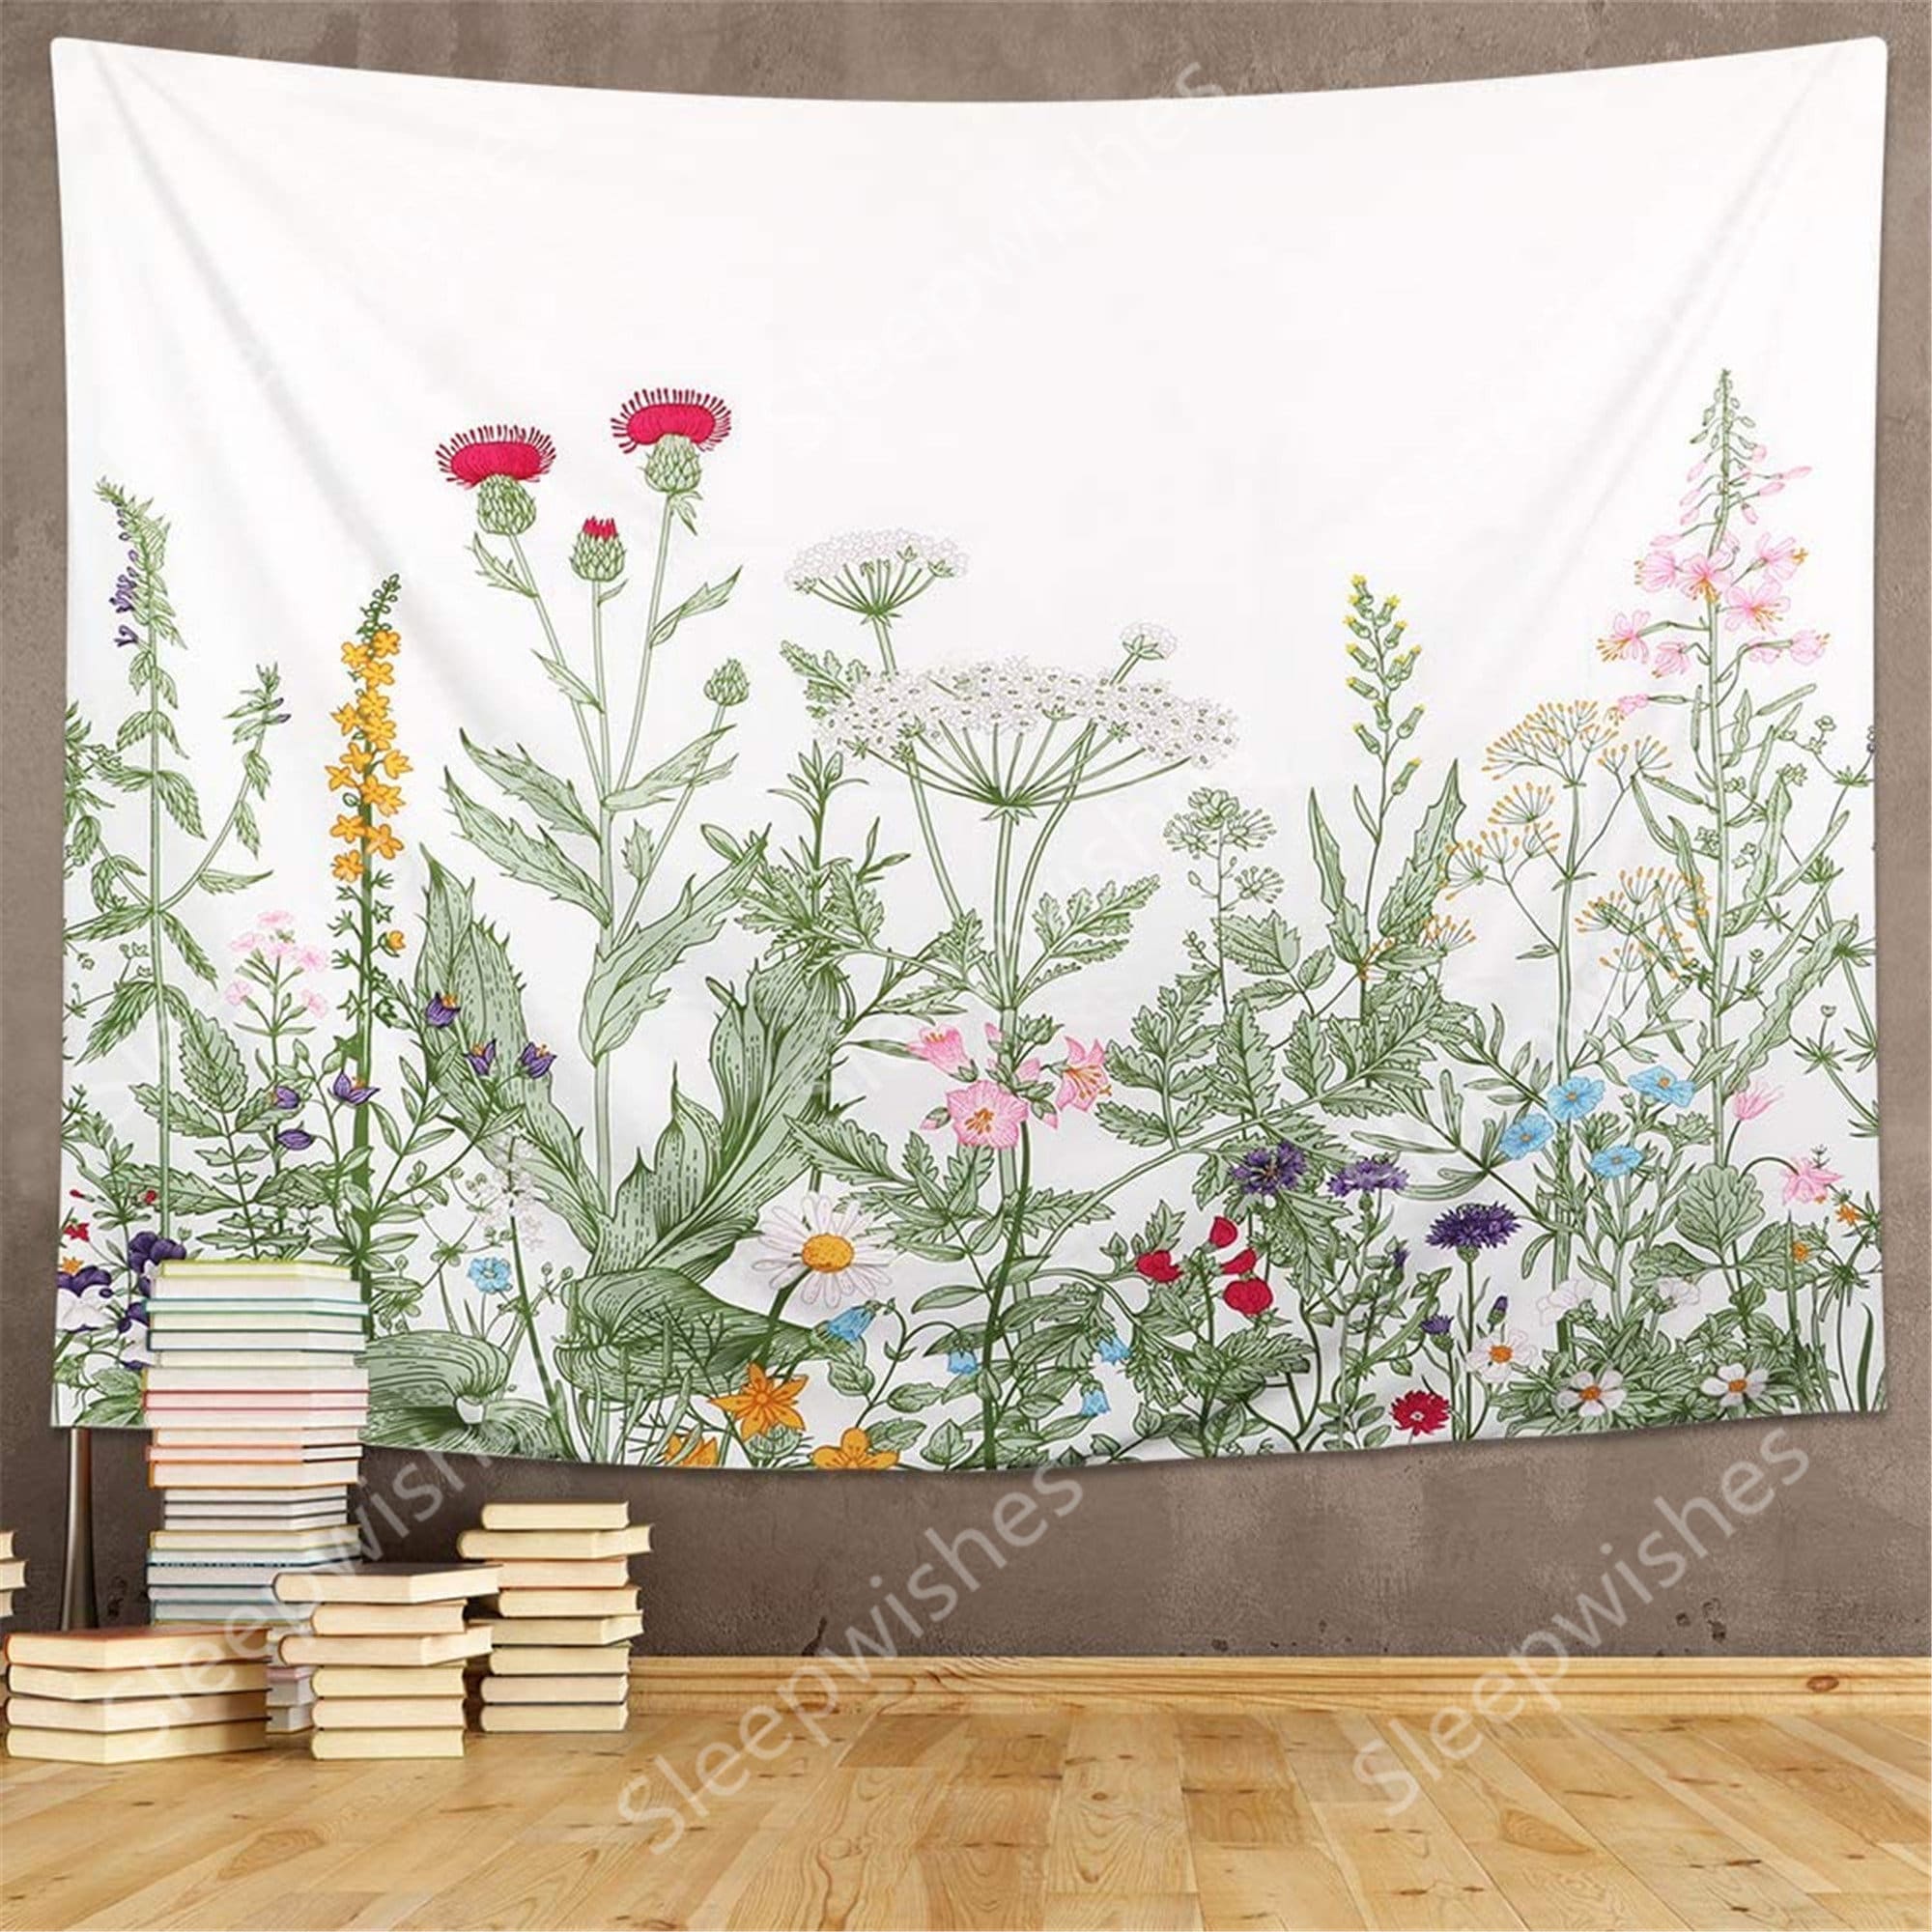 Colorful Floral Plants Tapestry Vintage Herbs Tapestry Wild